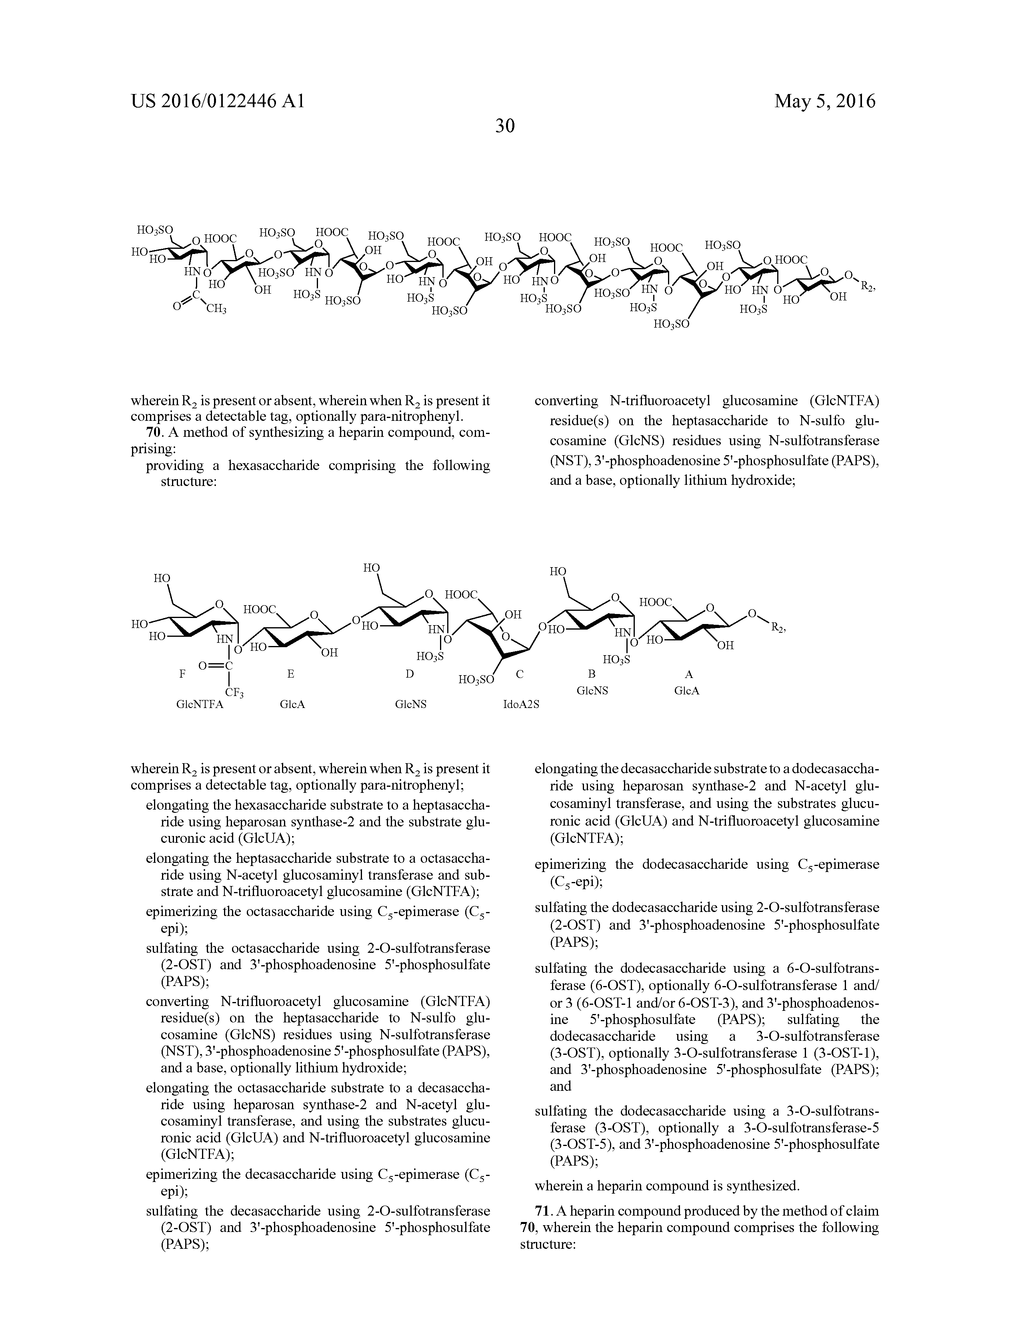 REVERSIBLE HEPARIN MOLECULES AND METHODS OF MAKING AND USING THE SAME - diagram, schematic, and image 39